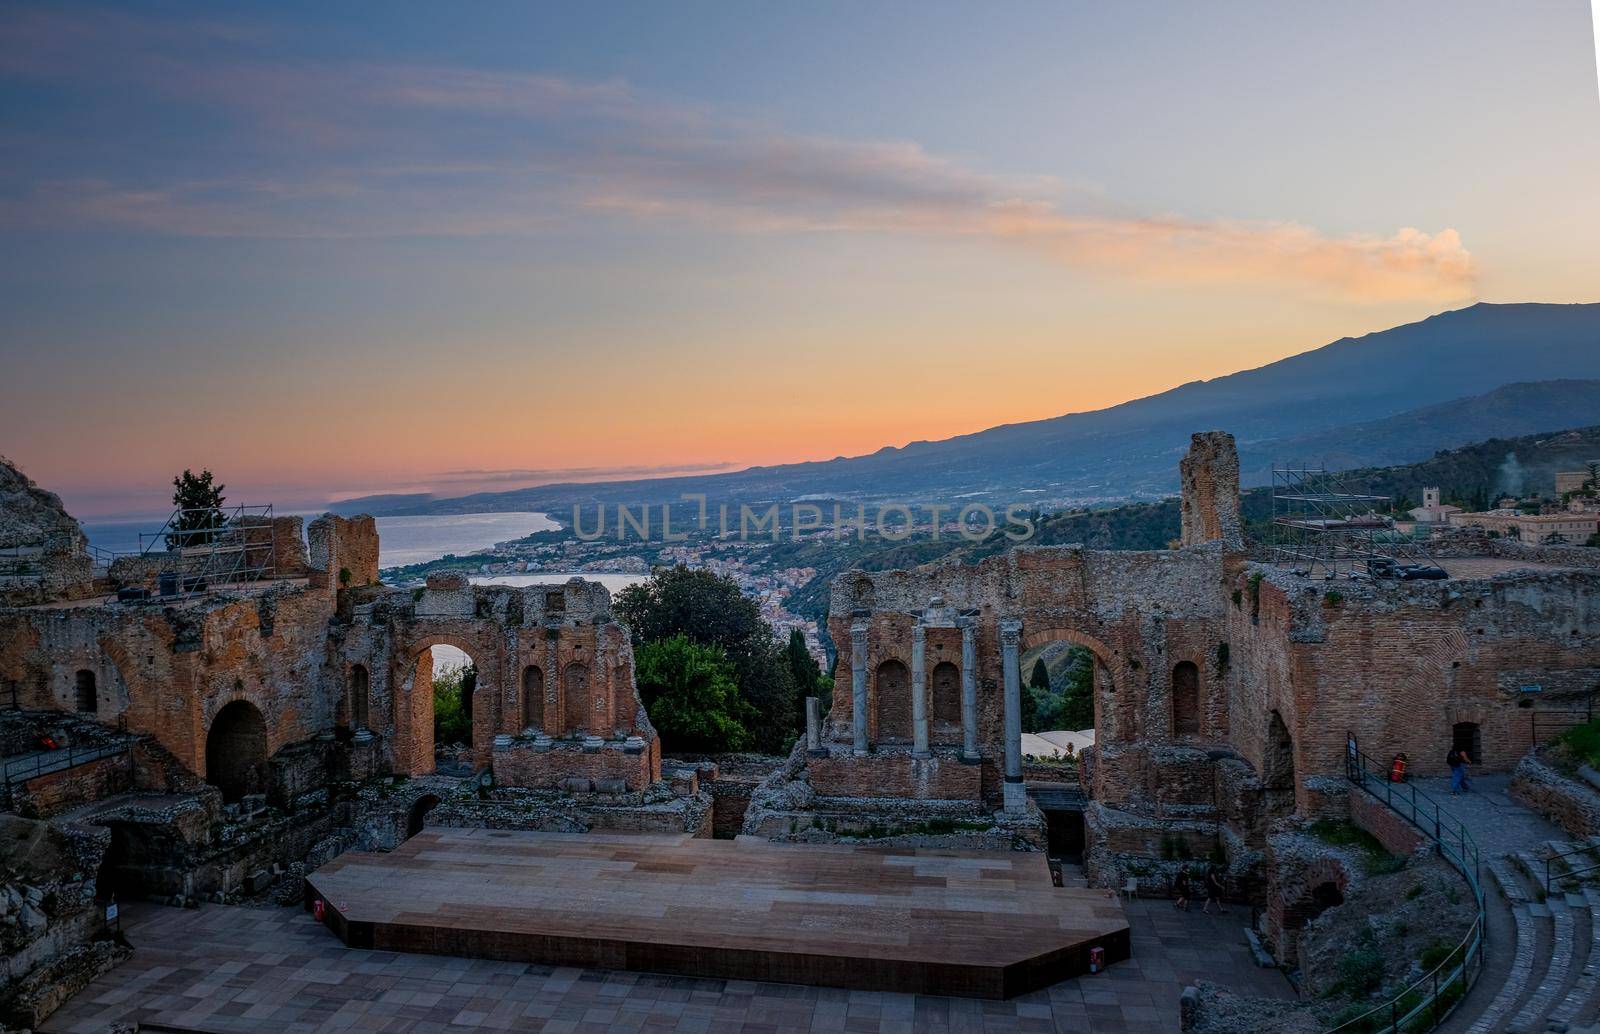 Ruins of Ancient Greek theatre in Taormina on background of Etna Volcano, Italy. Taormina located in Metropolitan City of Messina, on east coast of island of Sicily. by fokkebok